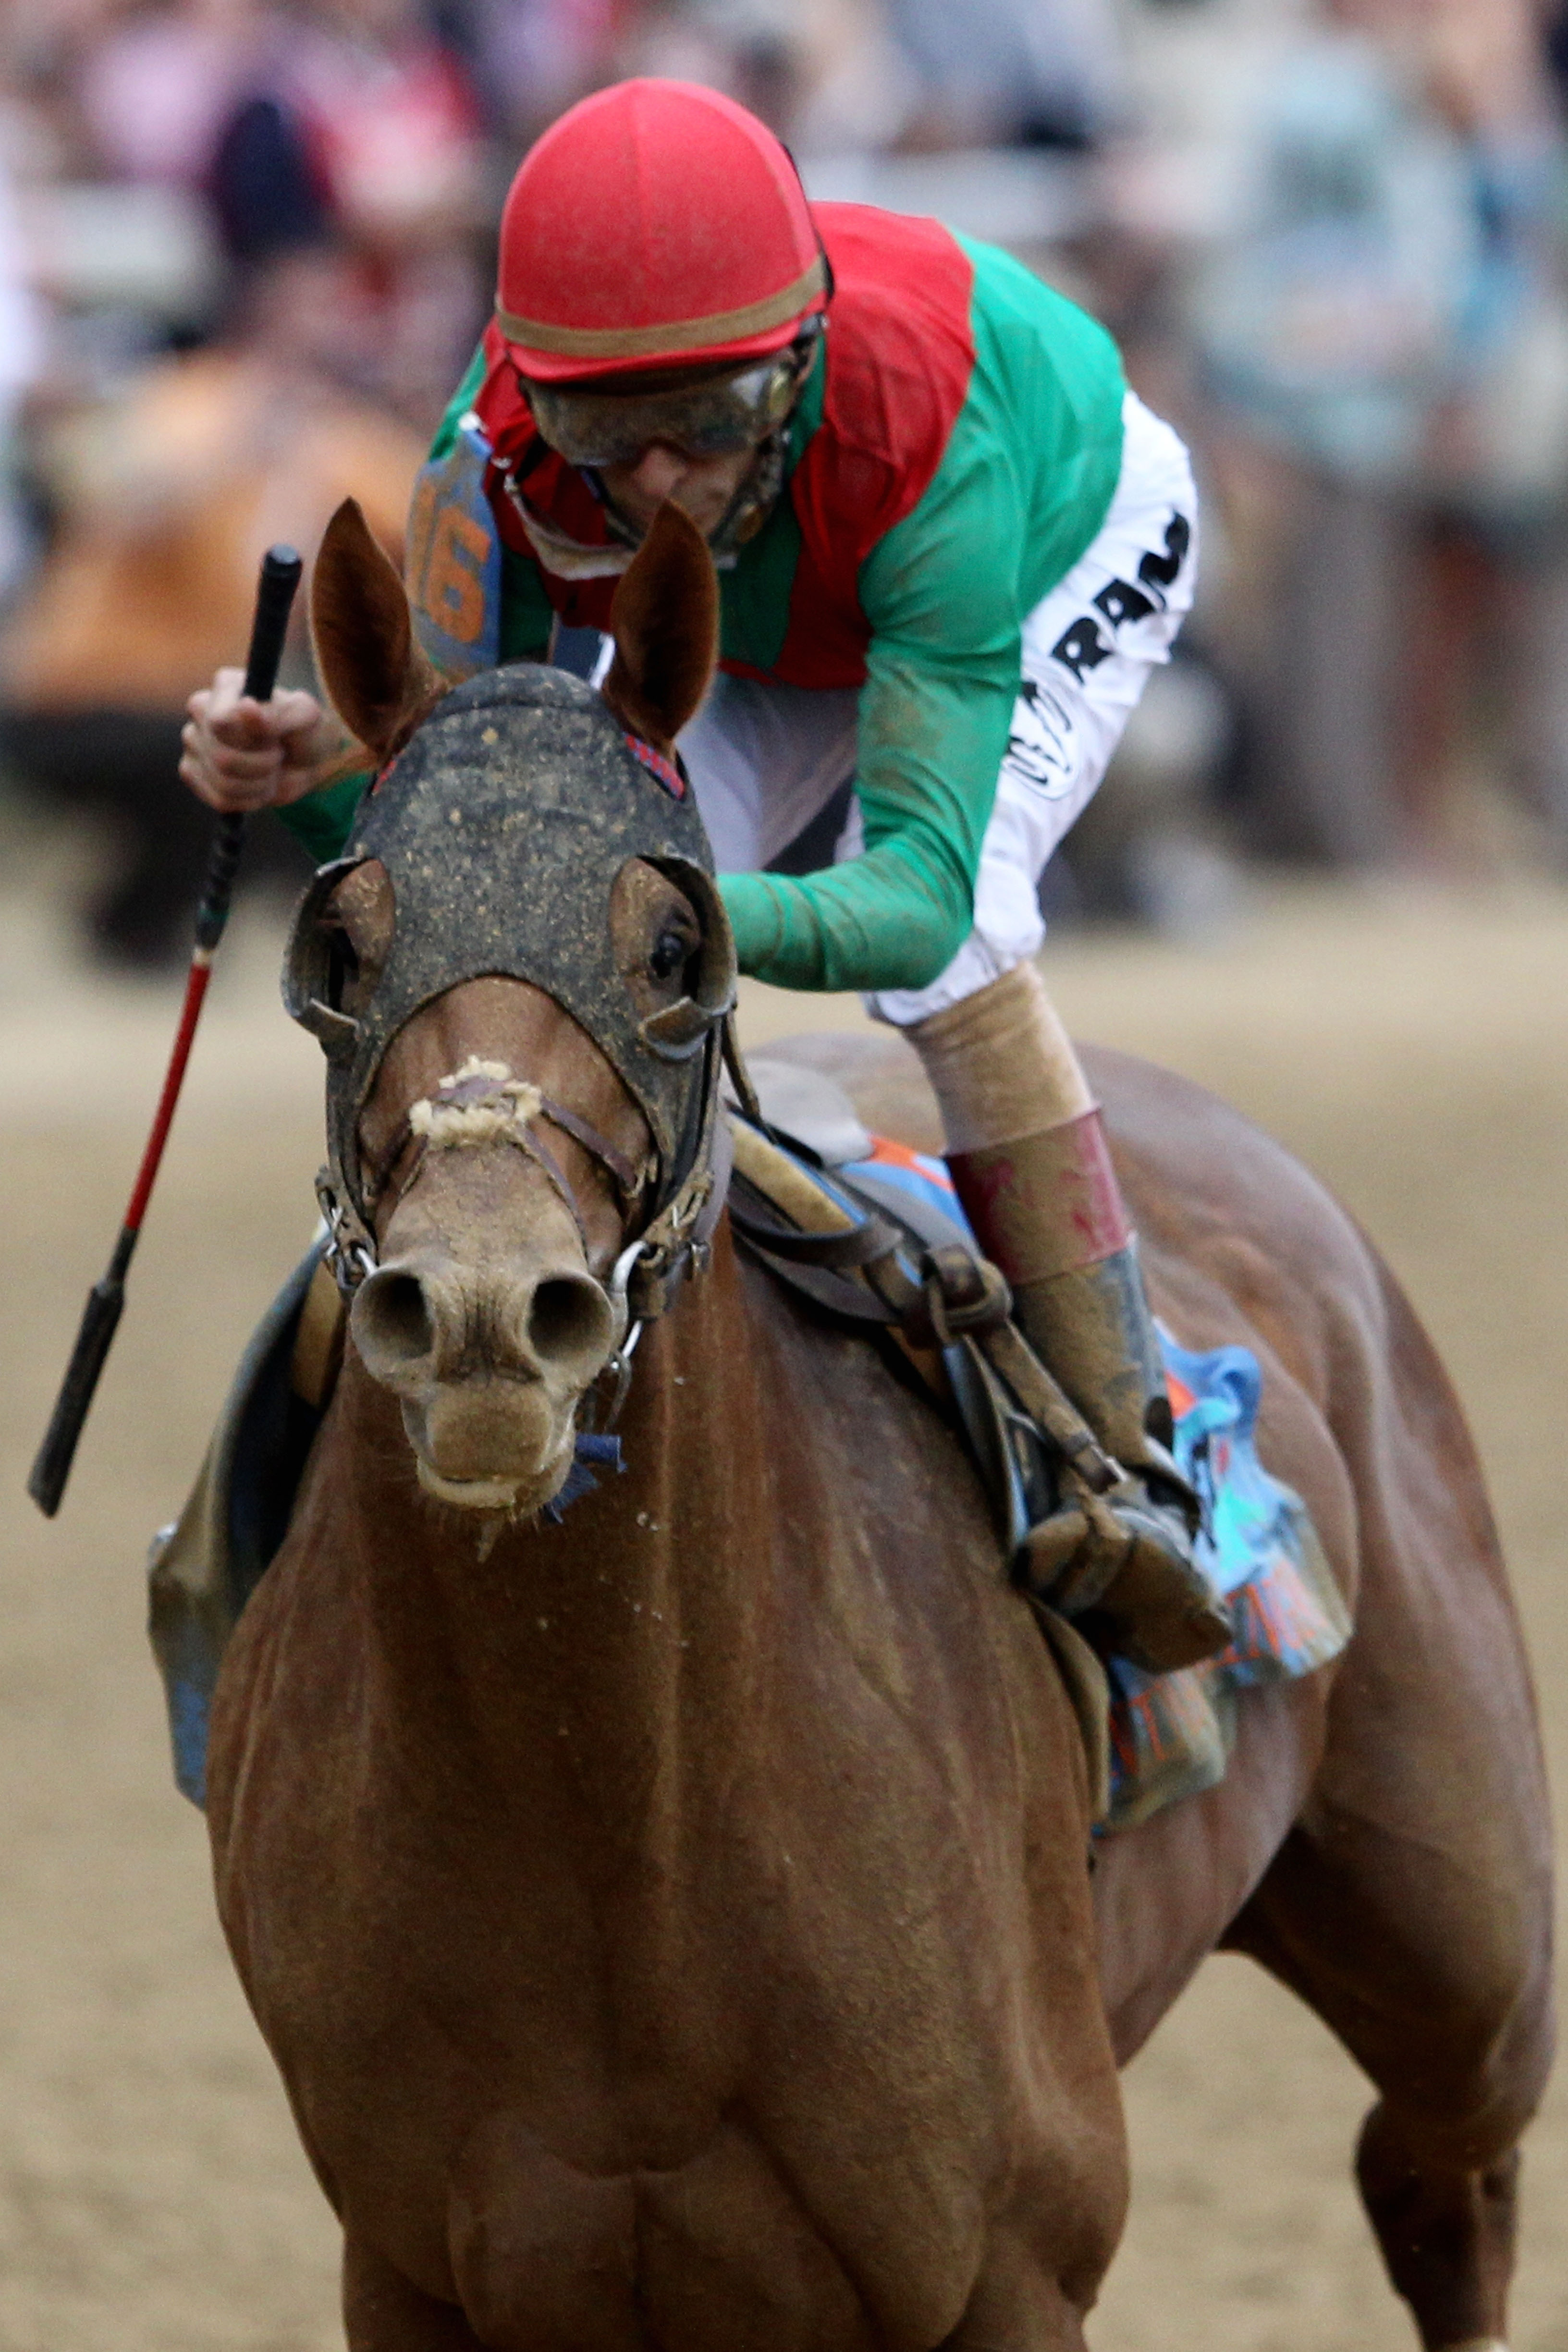 Kentucky Derby 2011: The 137th Run for the Roses at Churchill